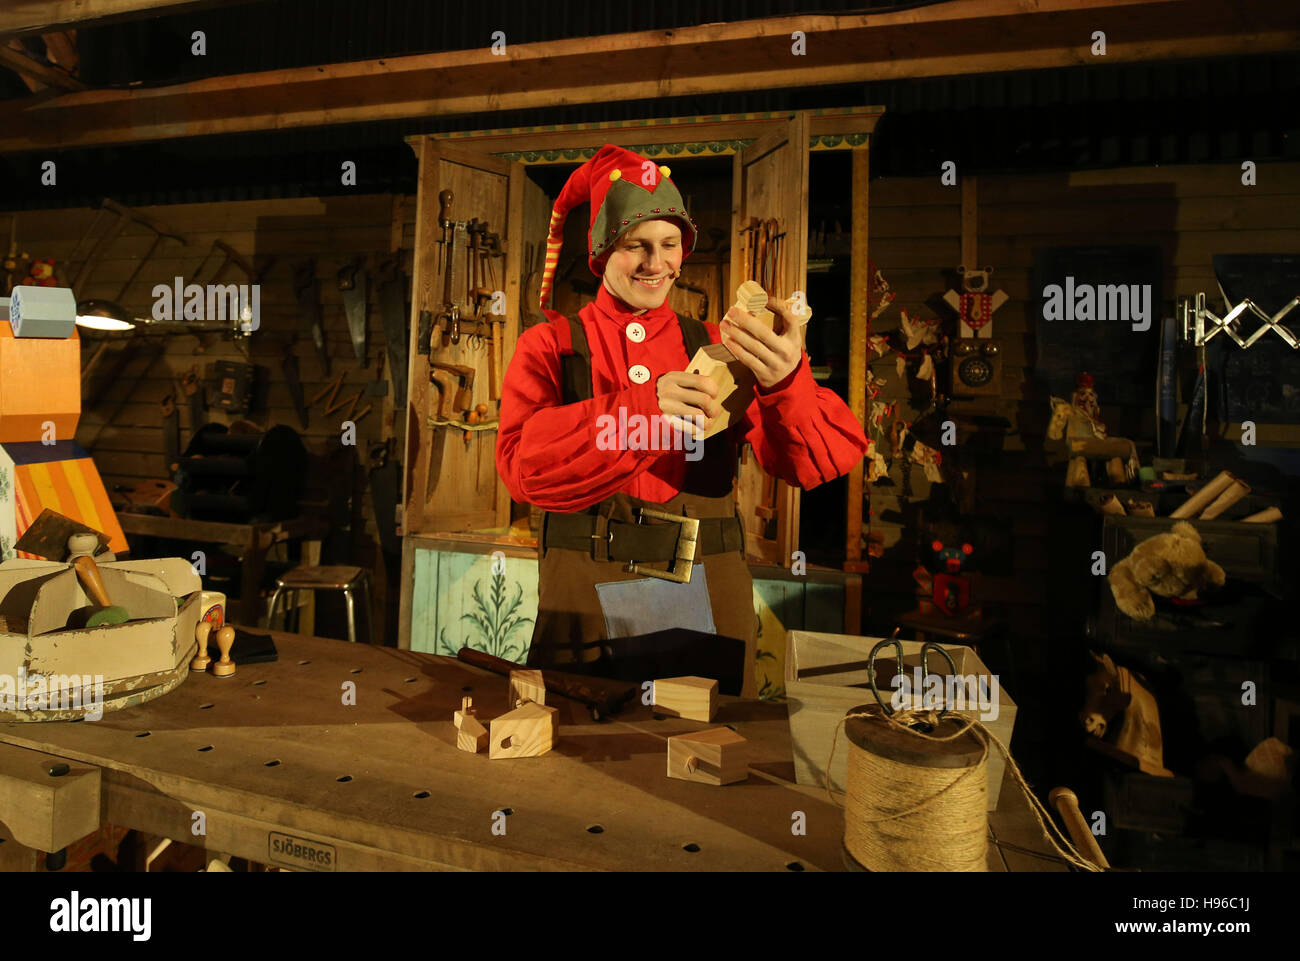 Elf Conker works in the Toy Factory during the opening day of LaplandUK, a village with an ice rink, reindeer and snowy landscapes in Ascot, Berkshire. Stock Photo